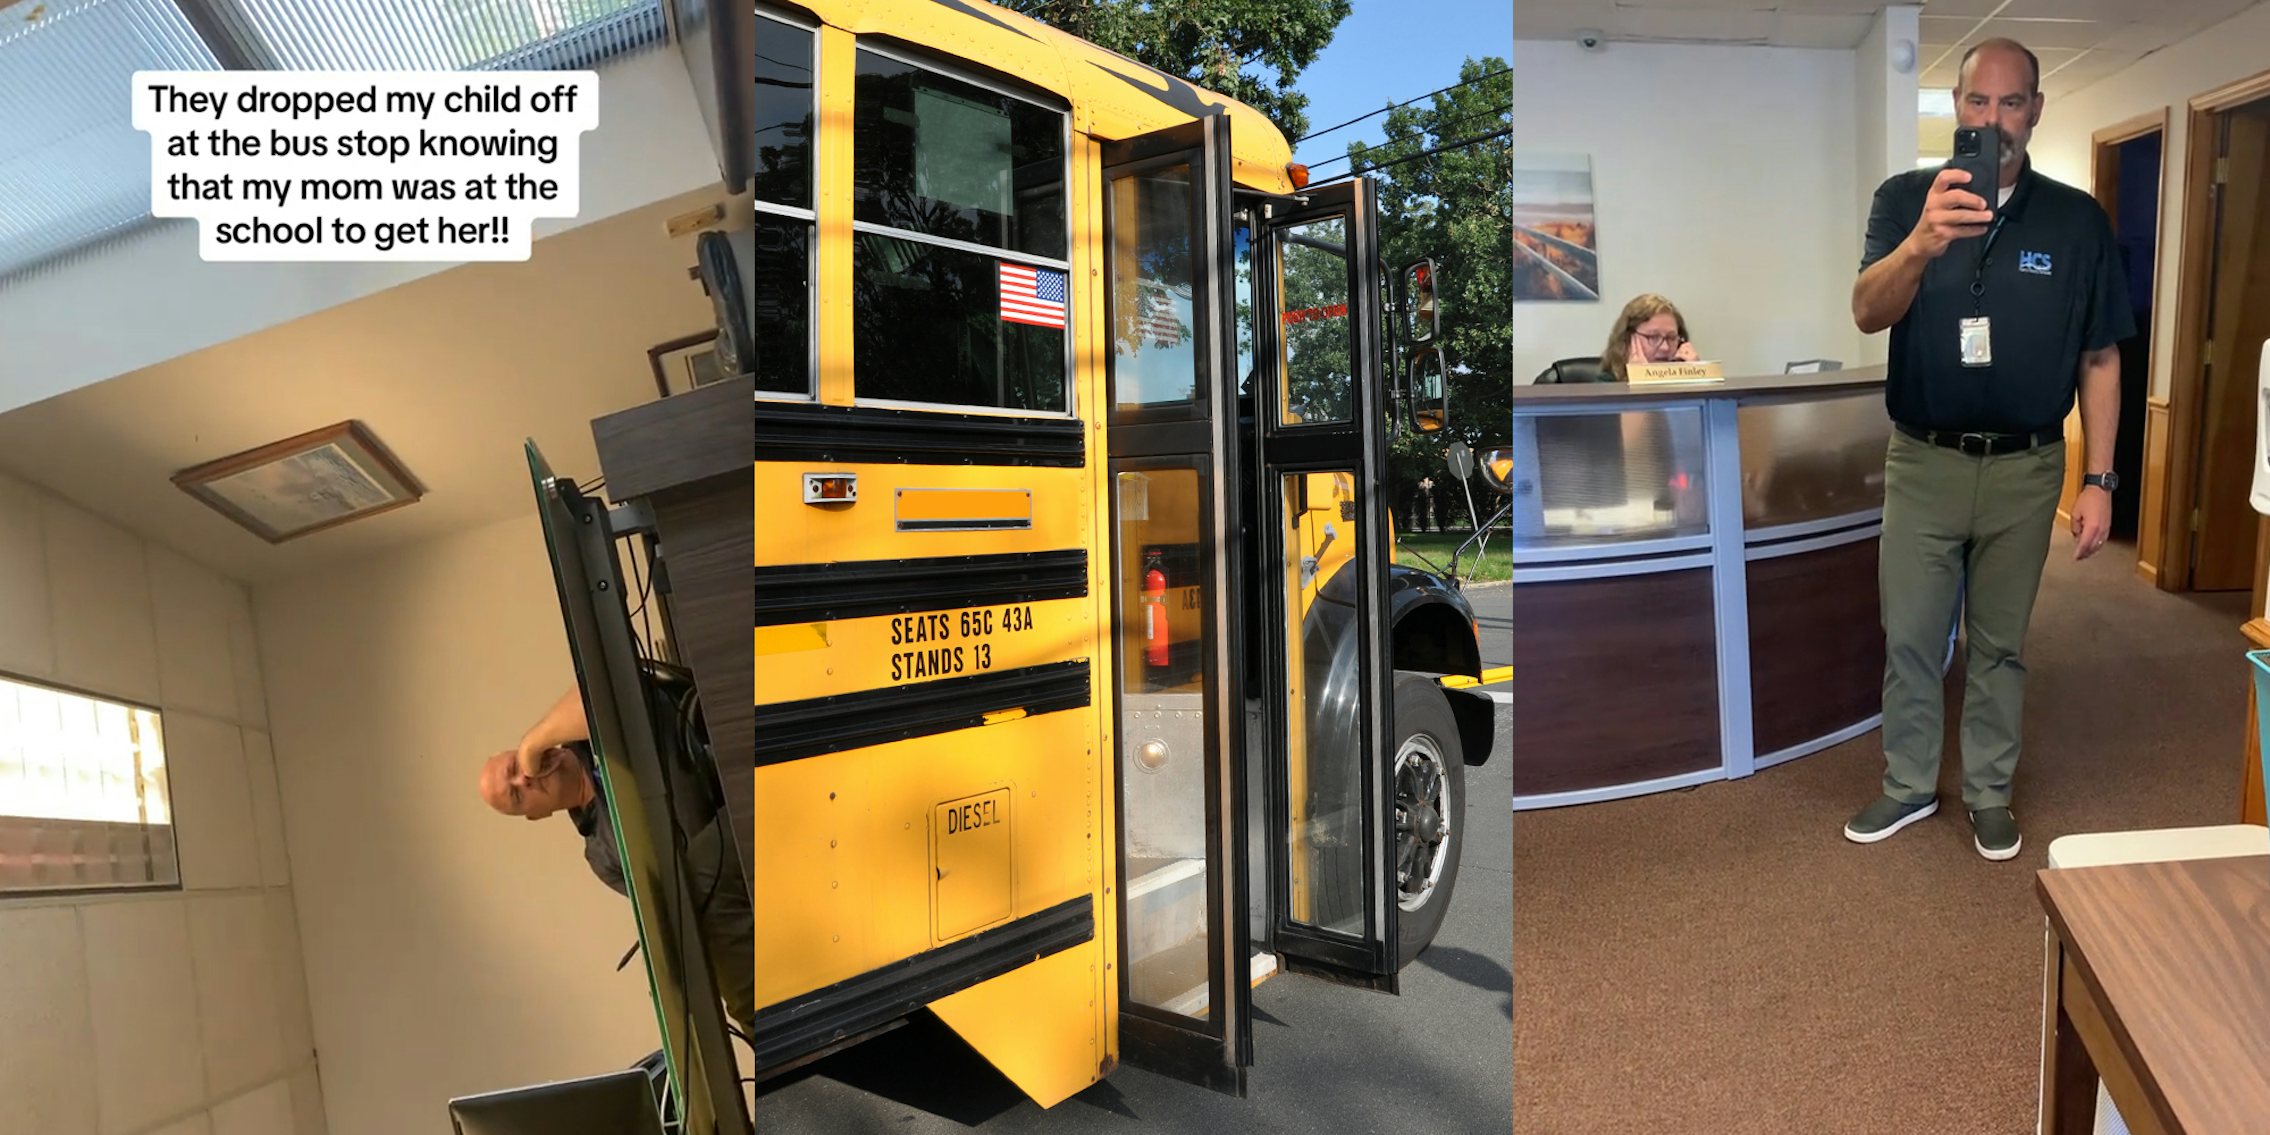 man at desk in school with caption 'They dropped my child off at the bus stop knowing that my mom was at the school to get her!!' (l) school bus opening door (c) school faculty holding phones (r)